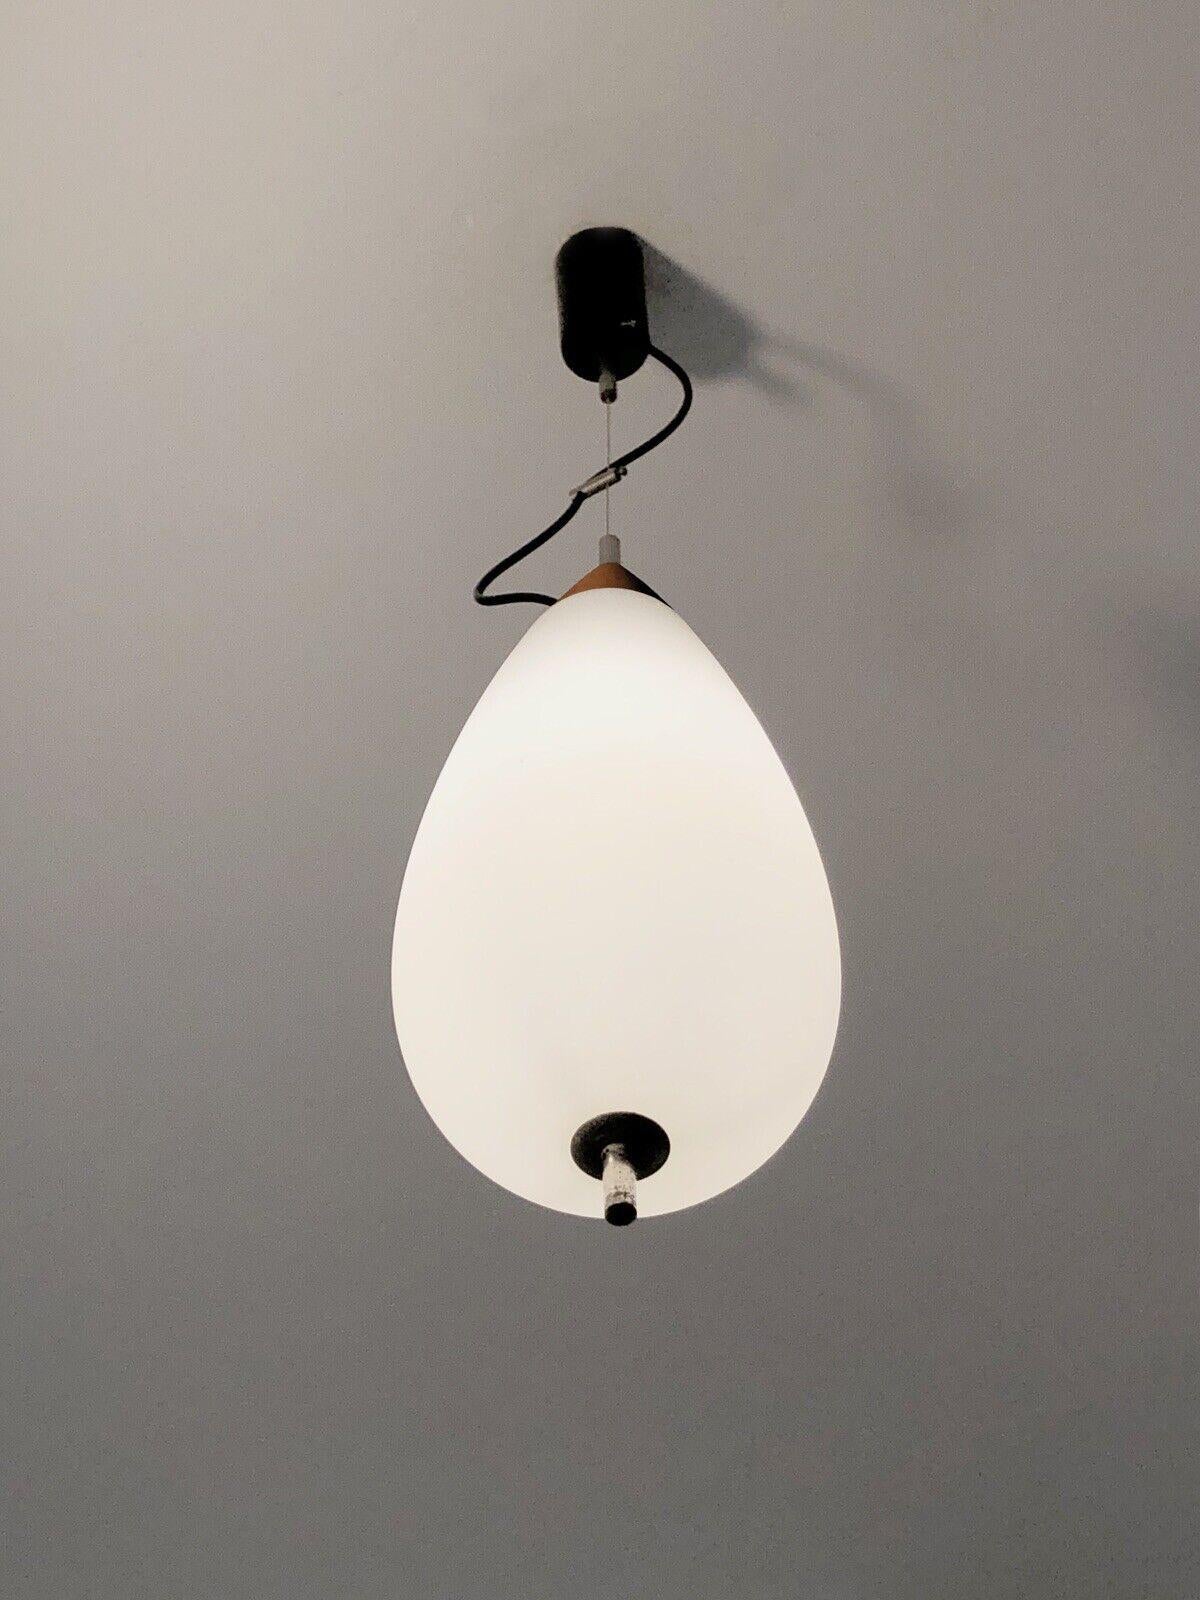 A MID-CENTURY-MODERN MODERNIST Ceiling Light by GOFFREDO REGGIANI, Italy 1960 For Sale 1